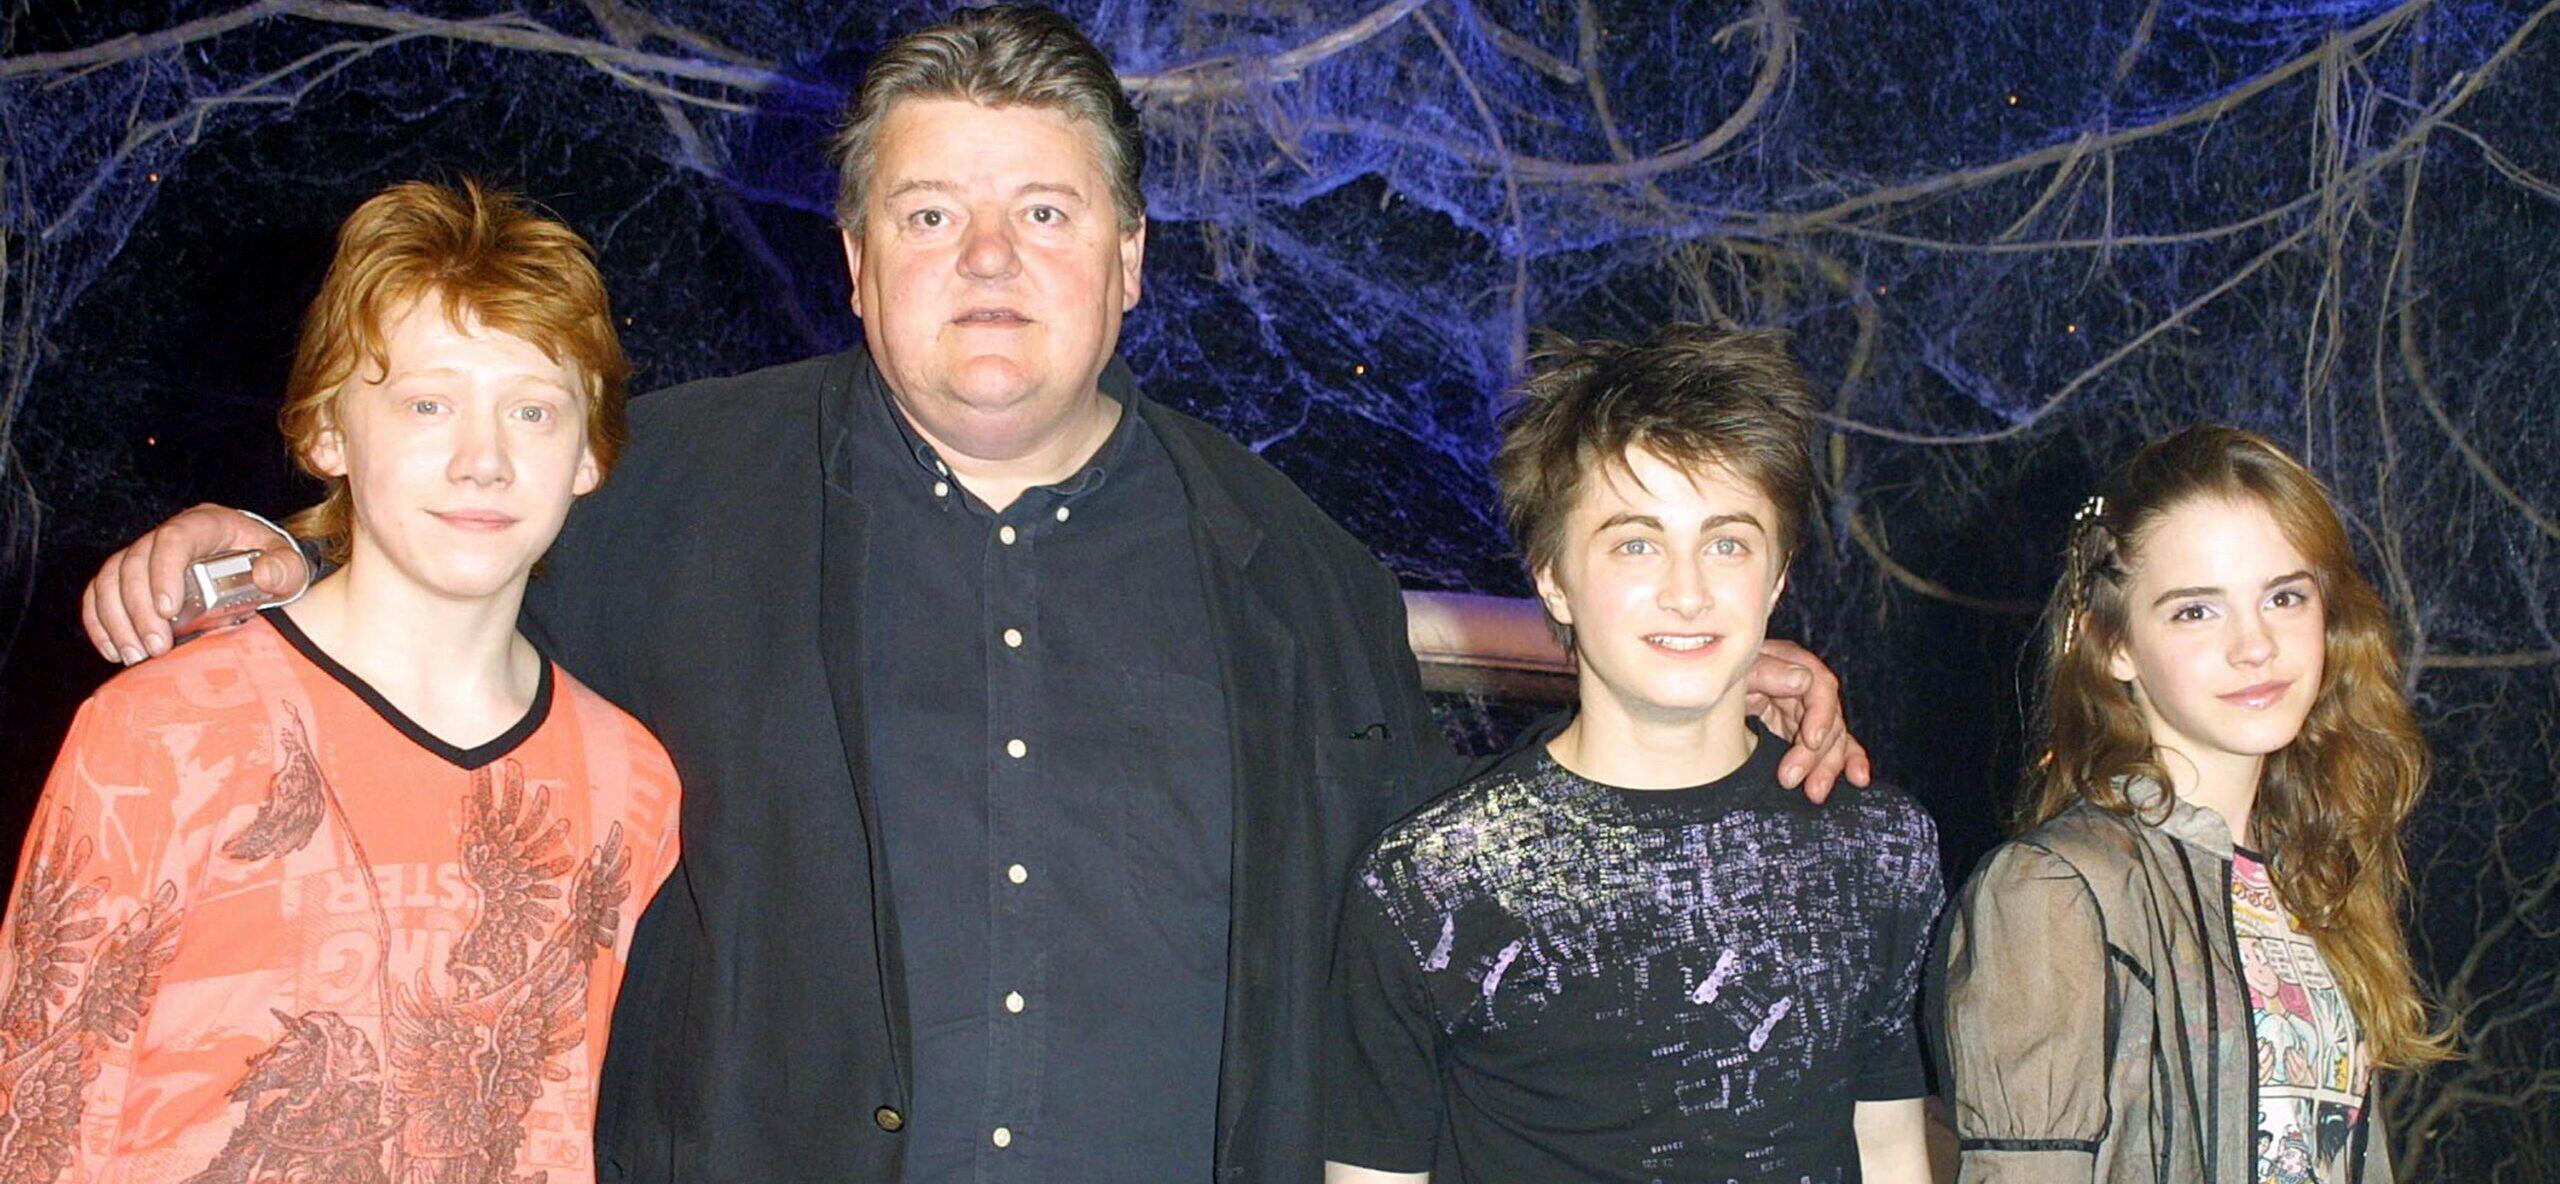 Archive picures taken in 2003. 01 Jan 2003 Pictured: Rupert Grint aka Ron, Robbie Coltrane aka Hagrid, Daniel Radcliffe aka Harry Potter and Emma Watson aka Hermione at the DVD launch of the hit movie Harry Potter and the Chamber of Secrets. The event took place at Leavesden Studios in Hertfordshire, England. Photo credit: MEGA TheMegaAgency.com +1 888 505 6342 (Mega Agency TagID: MEGA163420_011.jpg) [Photo via Mega Agency]